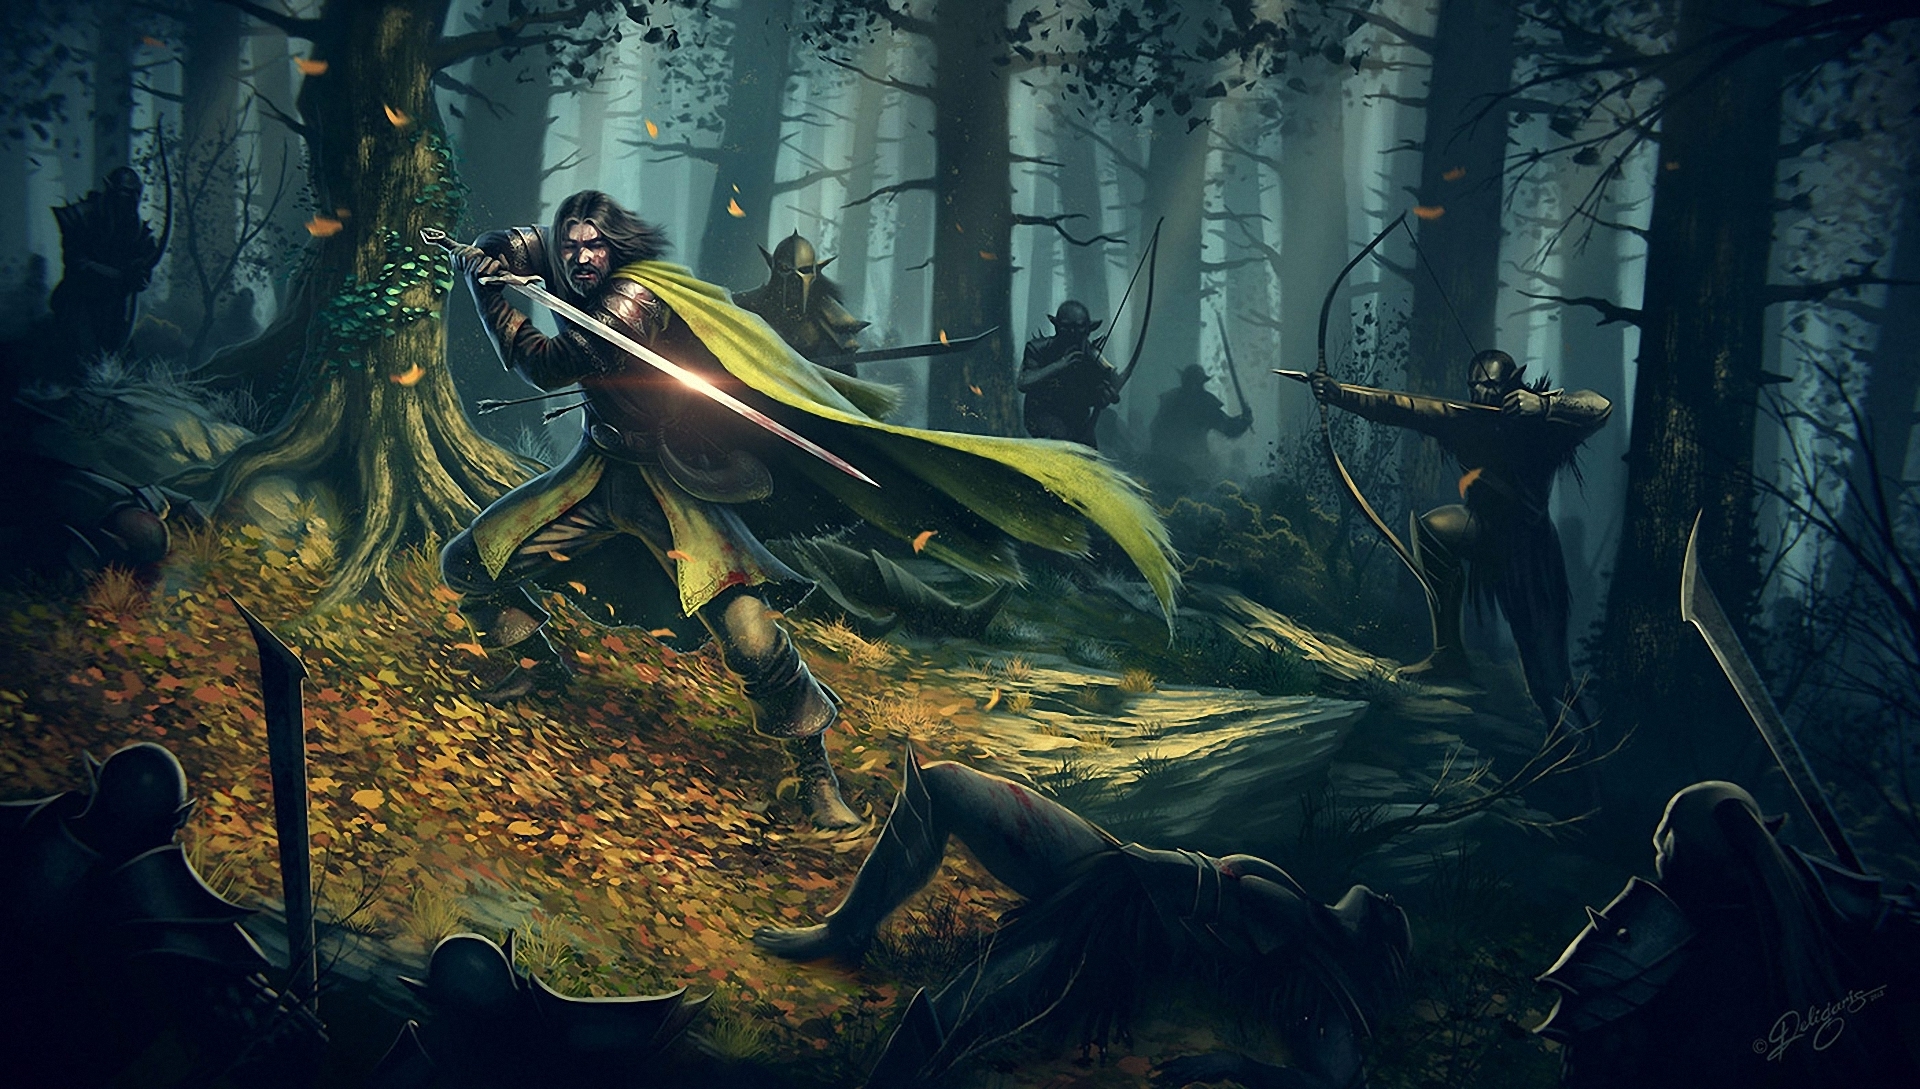 battles, Warriors, Archers, Forests, Swords, Fantasy, Weapons, Trees, Art, Knight Wallpaper